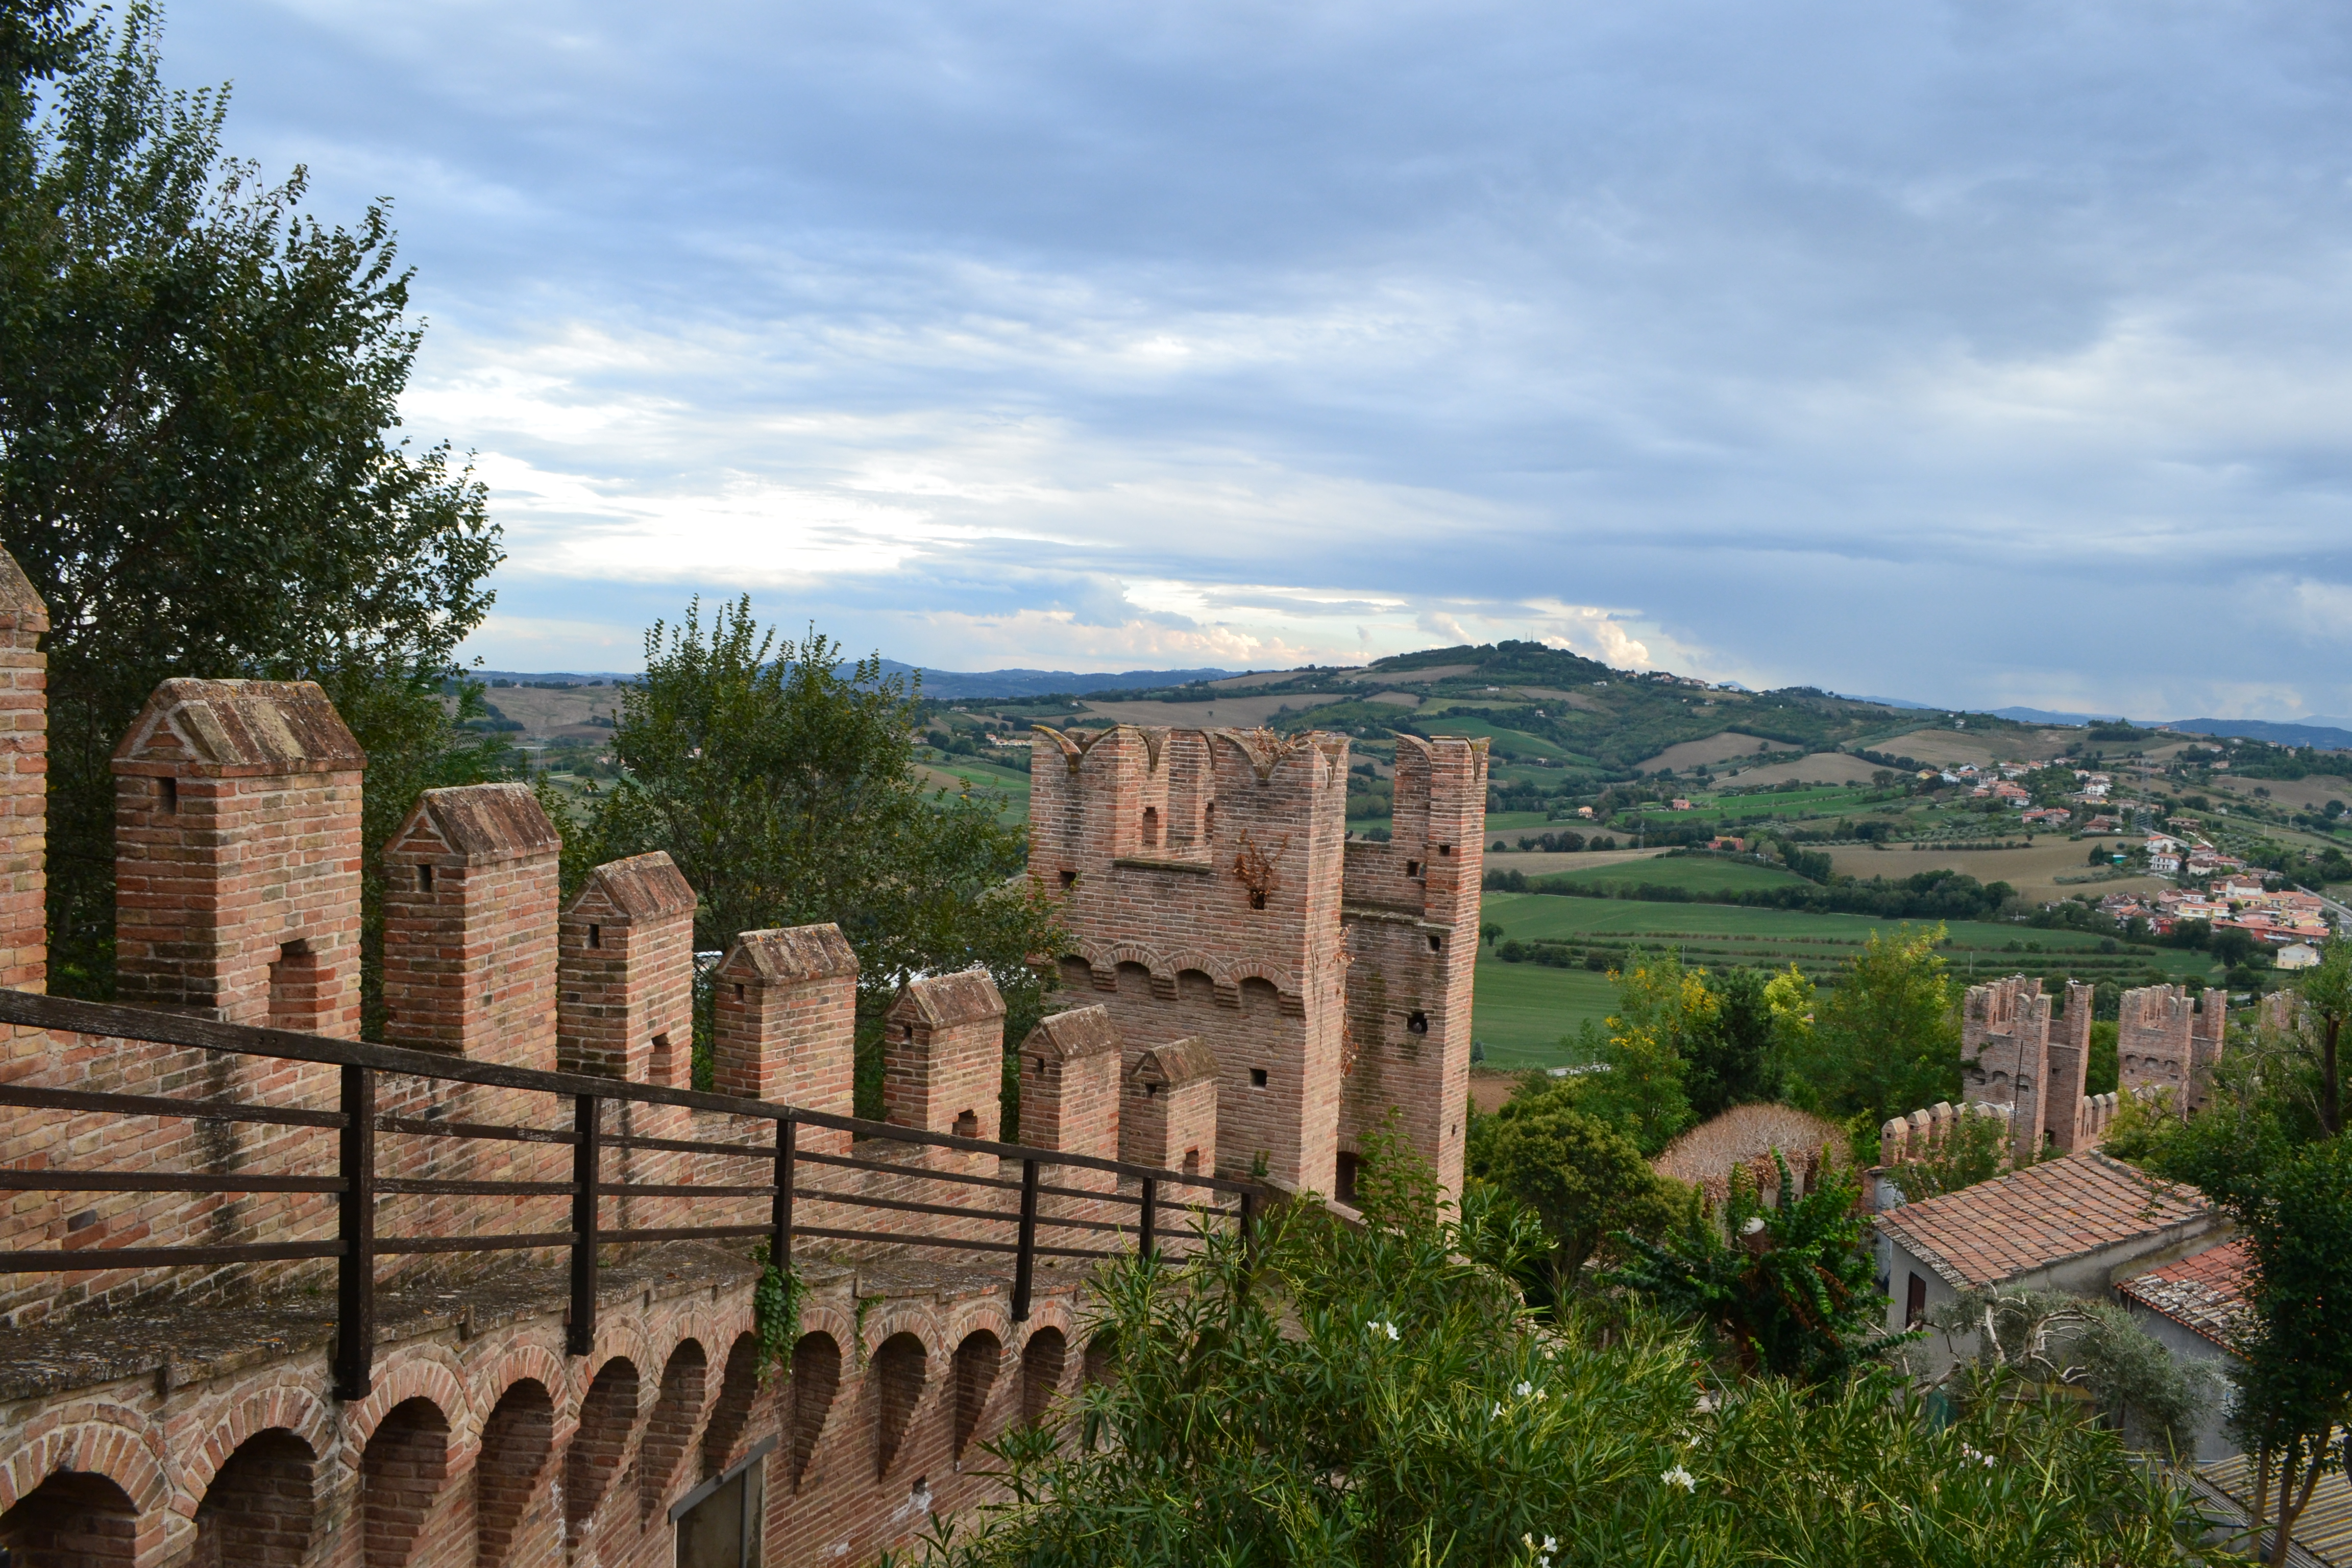 Top 9 Things to do in the Le Marche region of Italy - Travel Savvy Gal